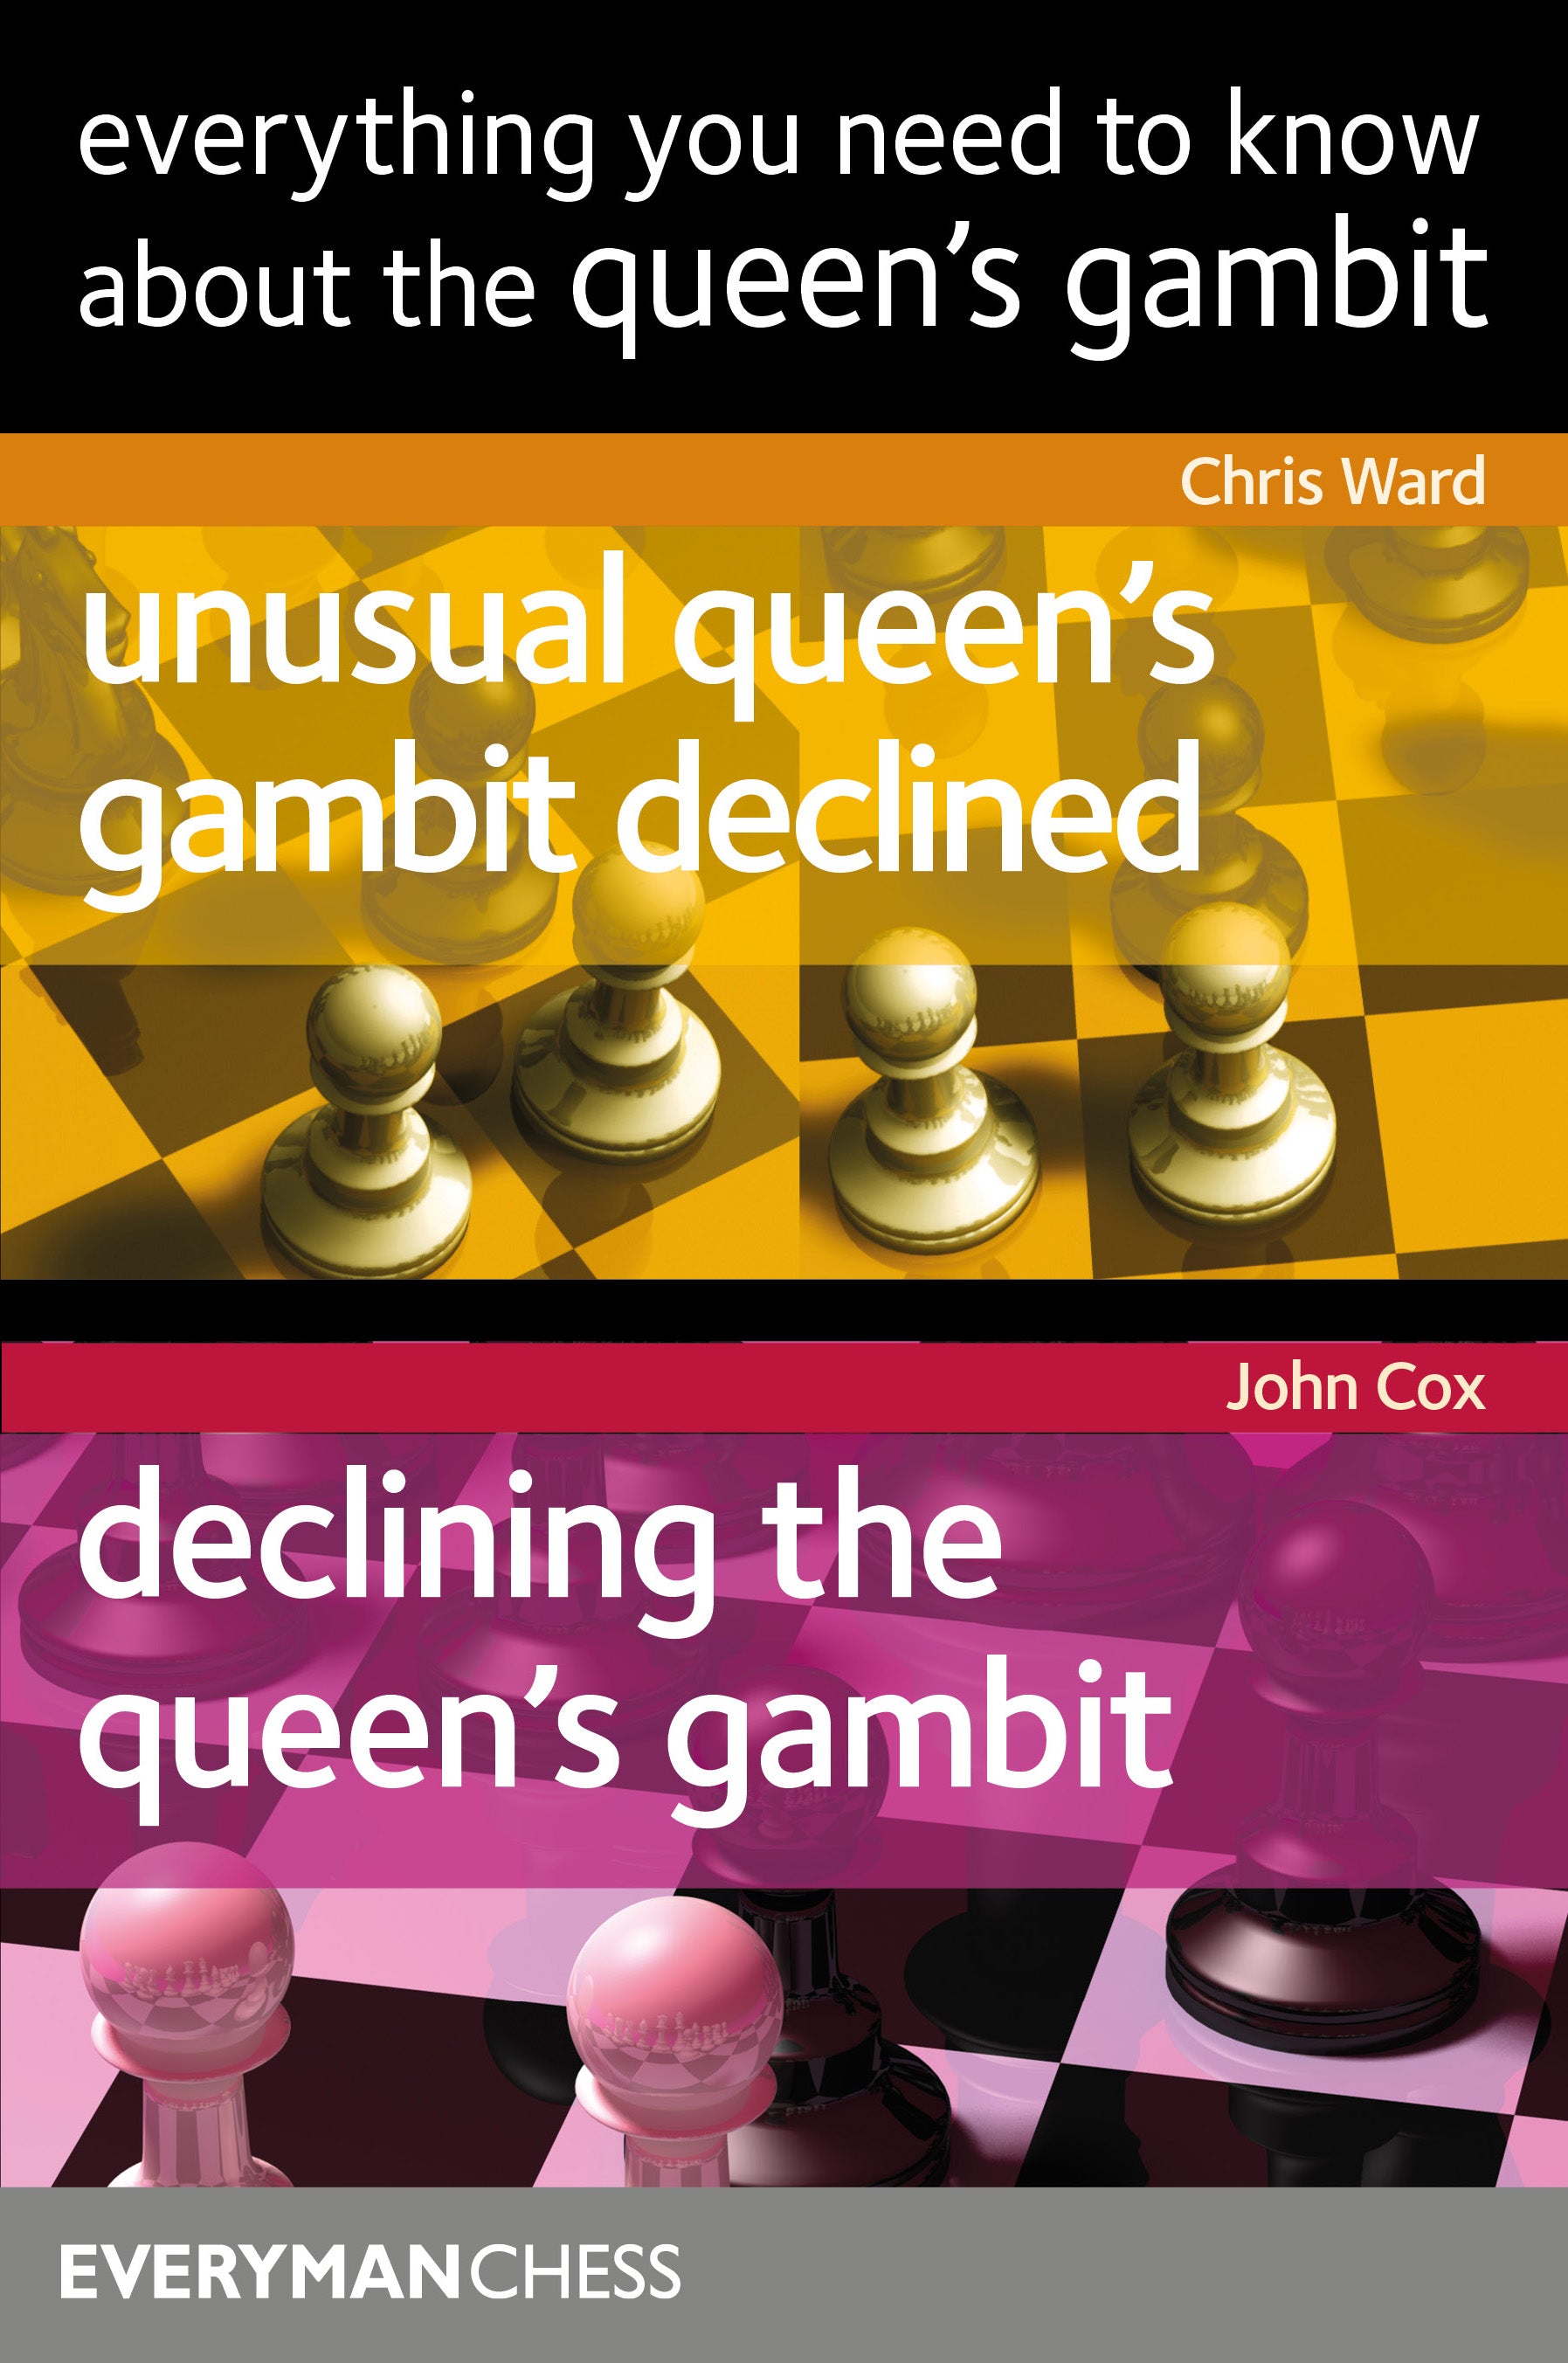 QUEEN'S GAMBIT DECLINED - The New York Times